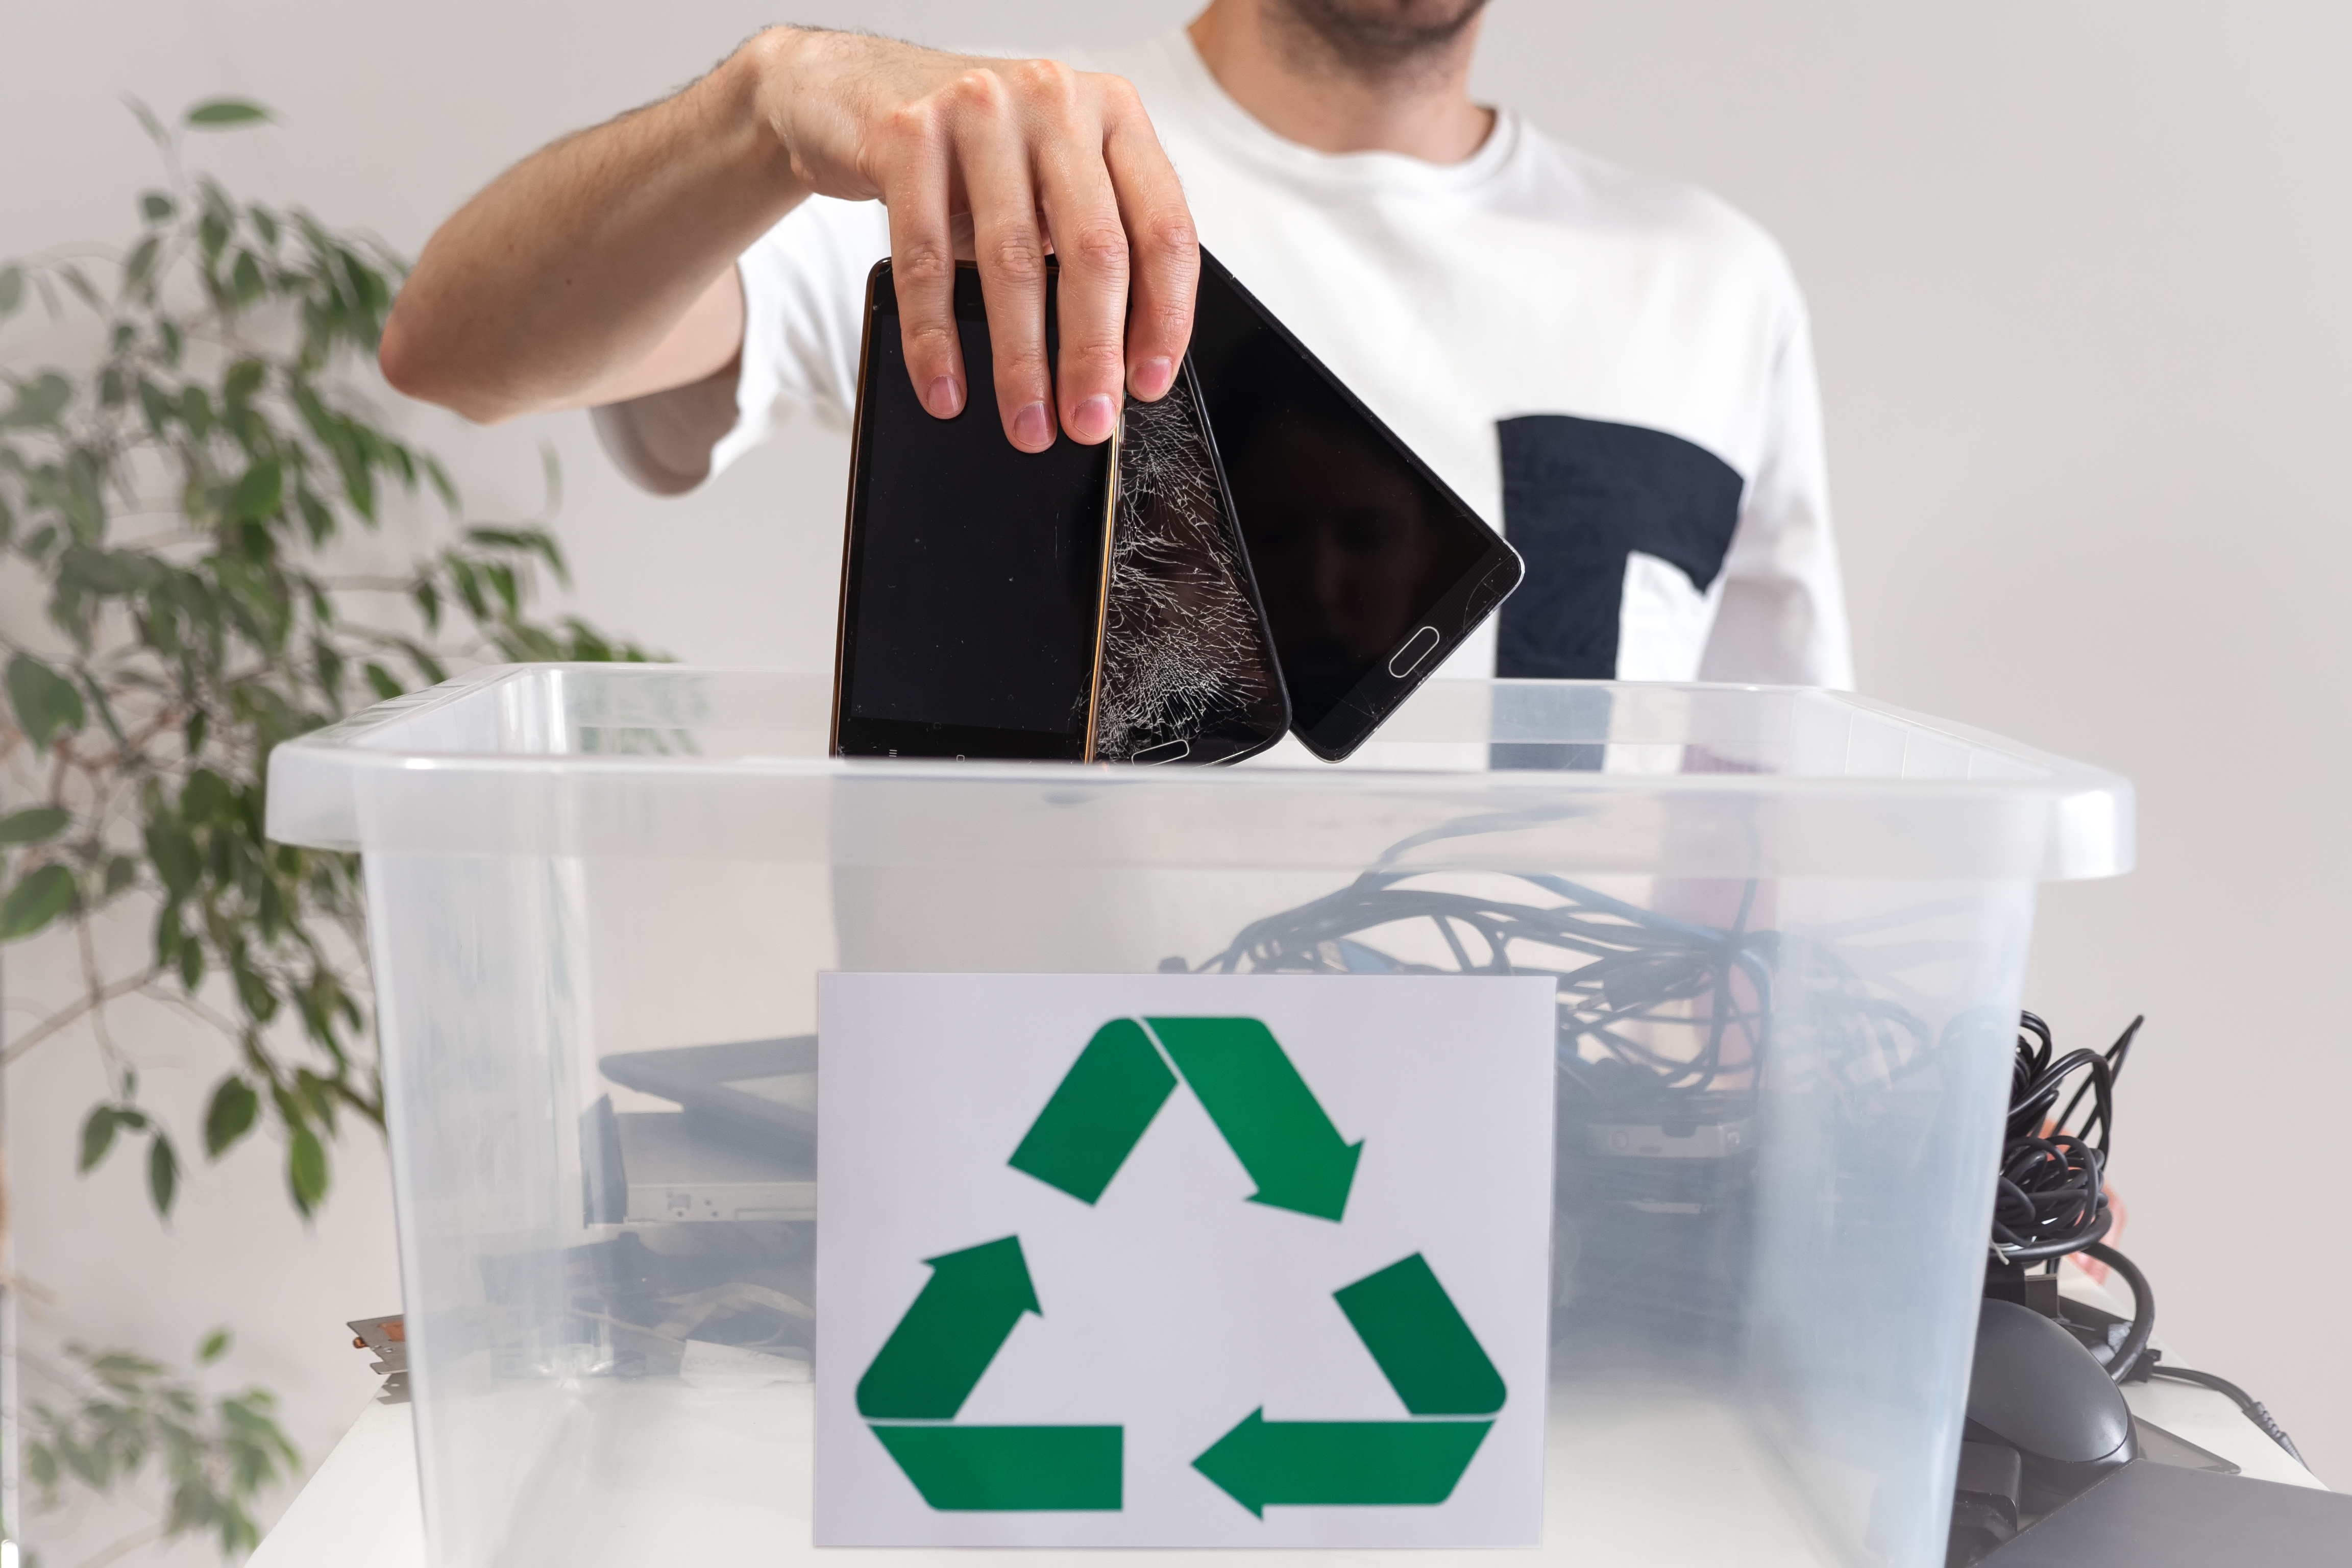 Man placing old smartphones into an electronics recycling bin